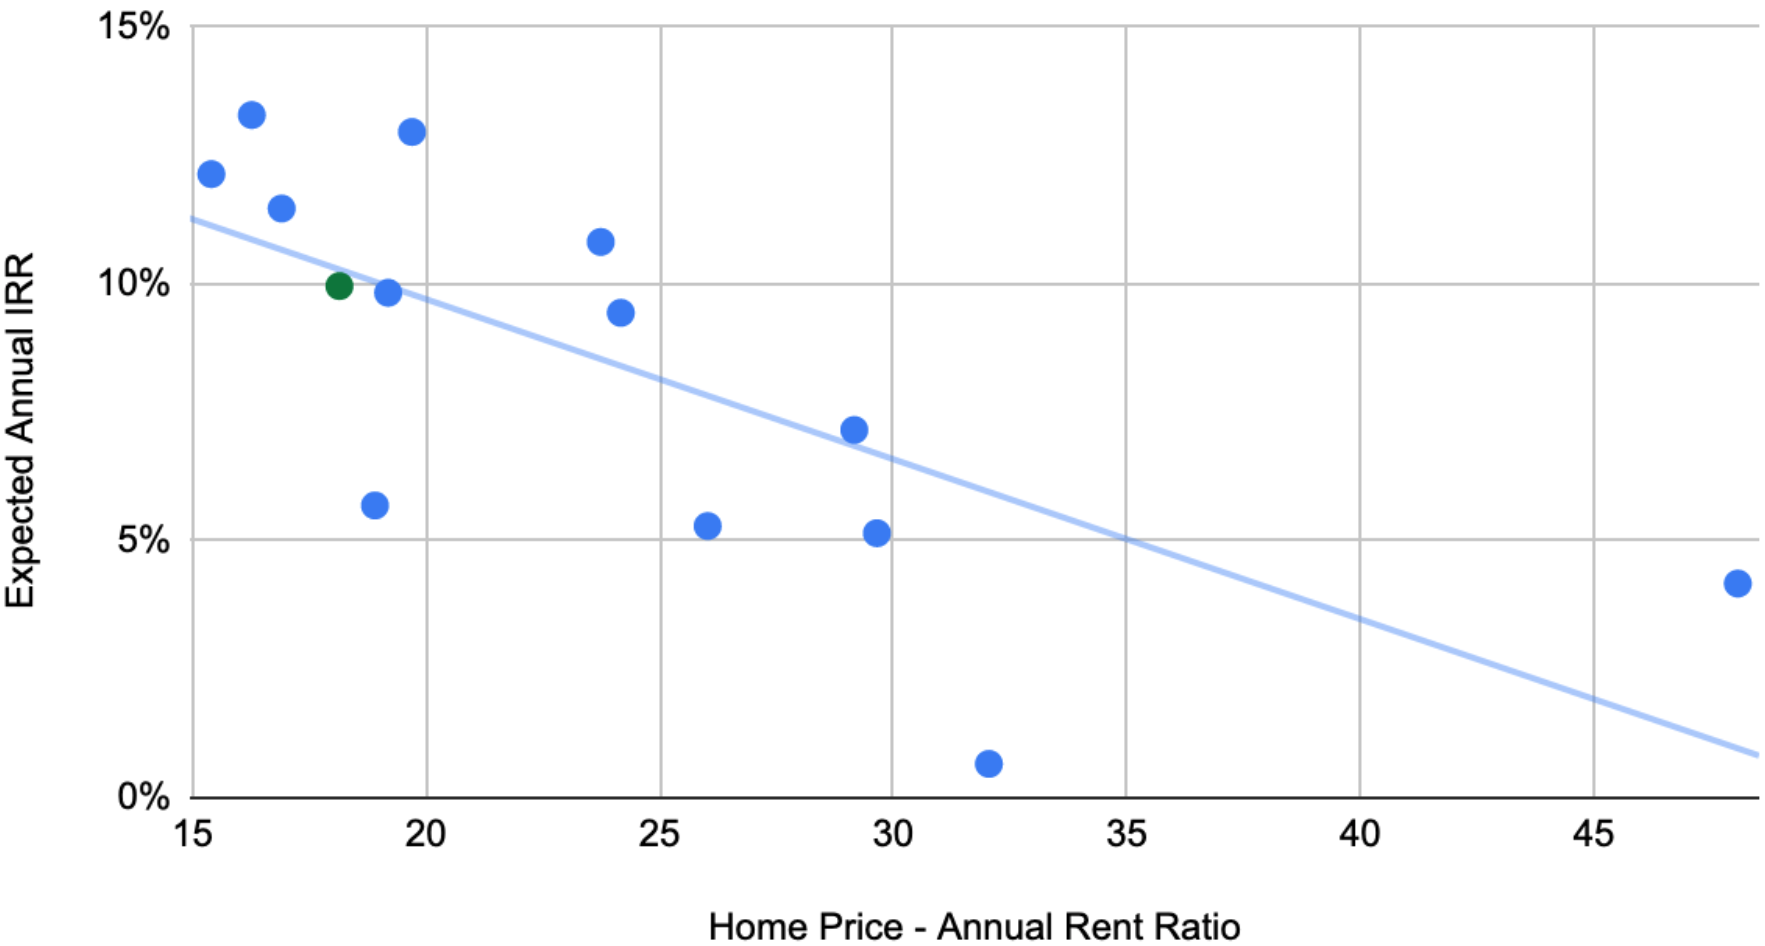 Home Price - Annual Rent Ratio vs. Expected Annual IRR